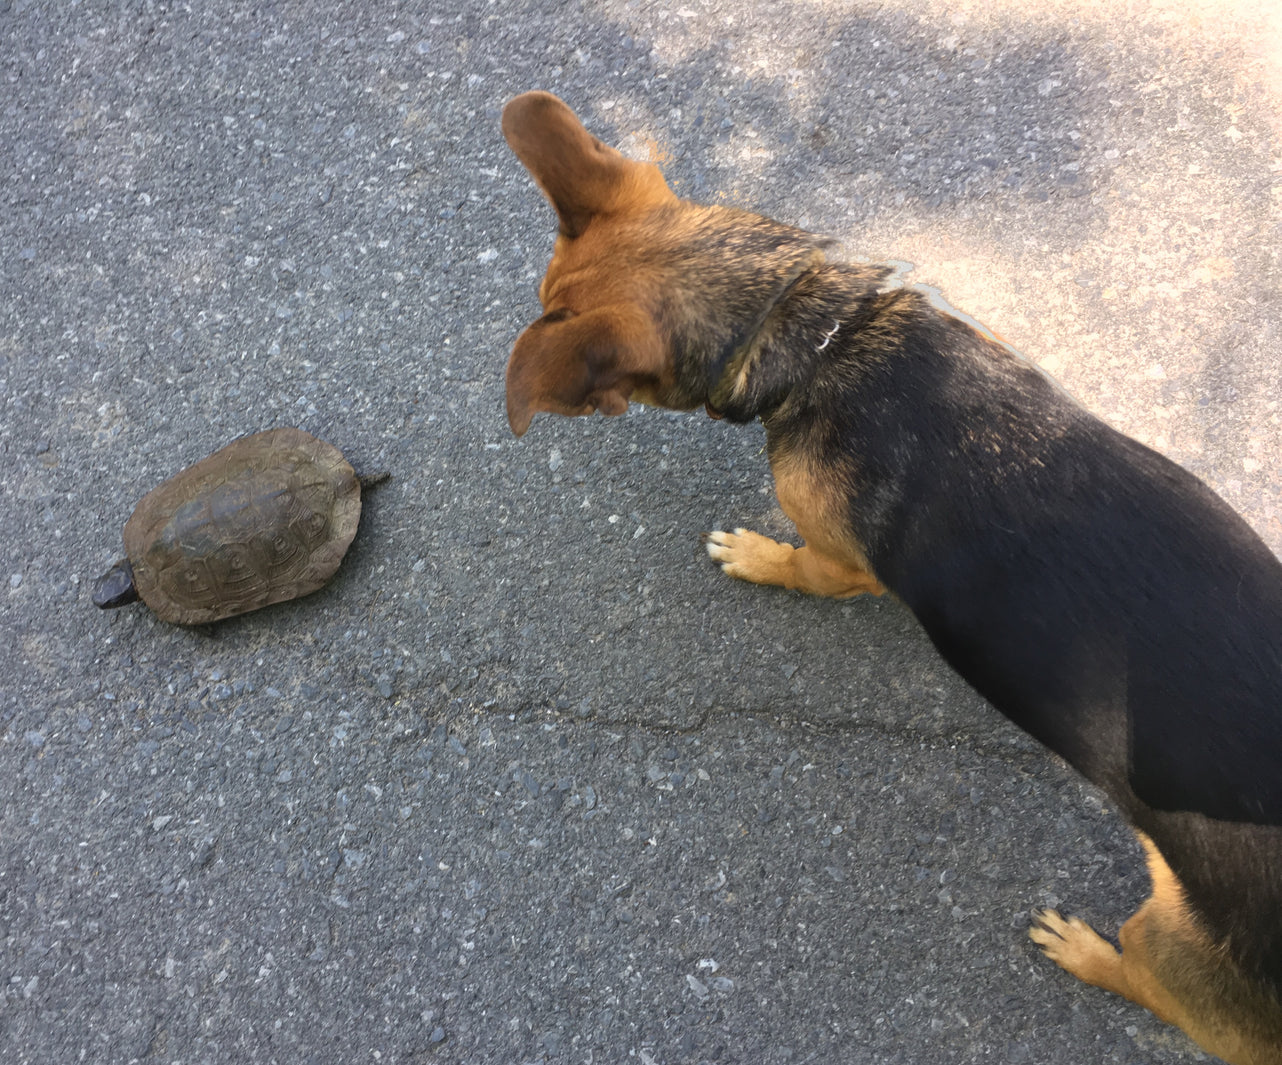 Snickers investigates a turtle, whose ancestors originated about 230 million years ago.